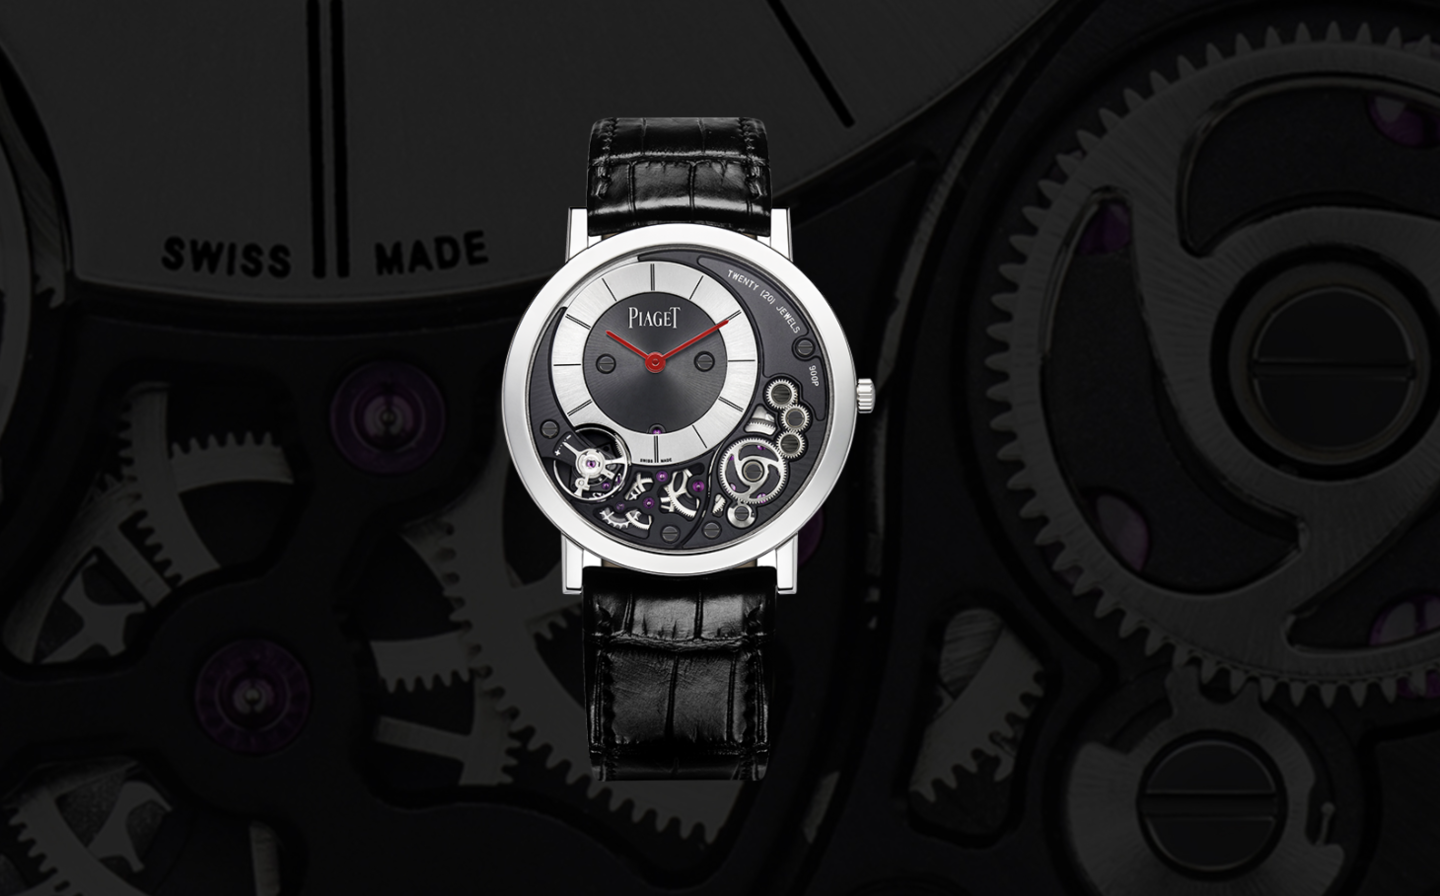 Introducing the Piaget Altiplano 900P Only Watch 2015